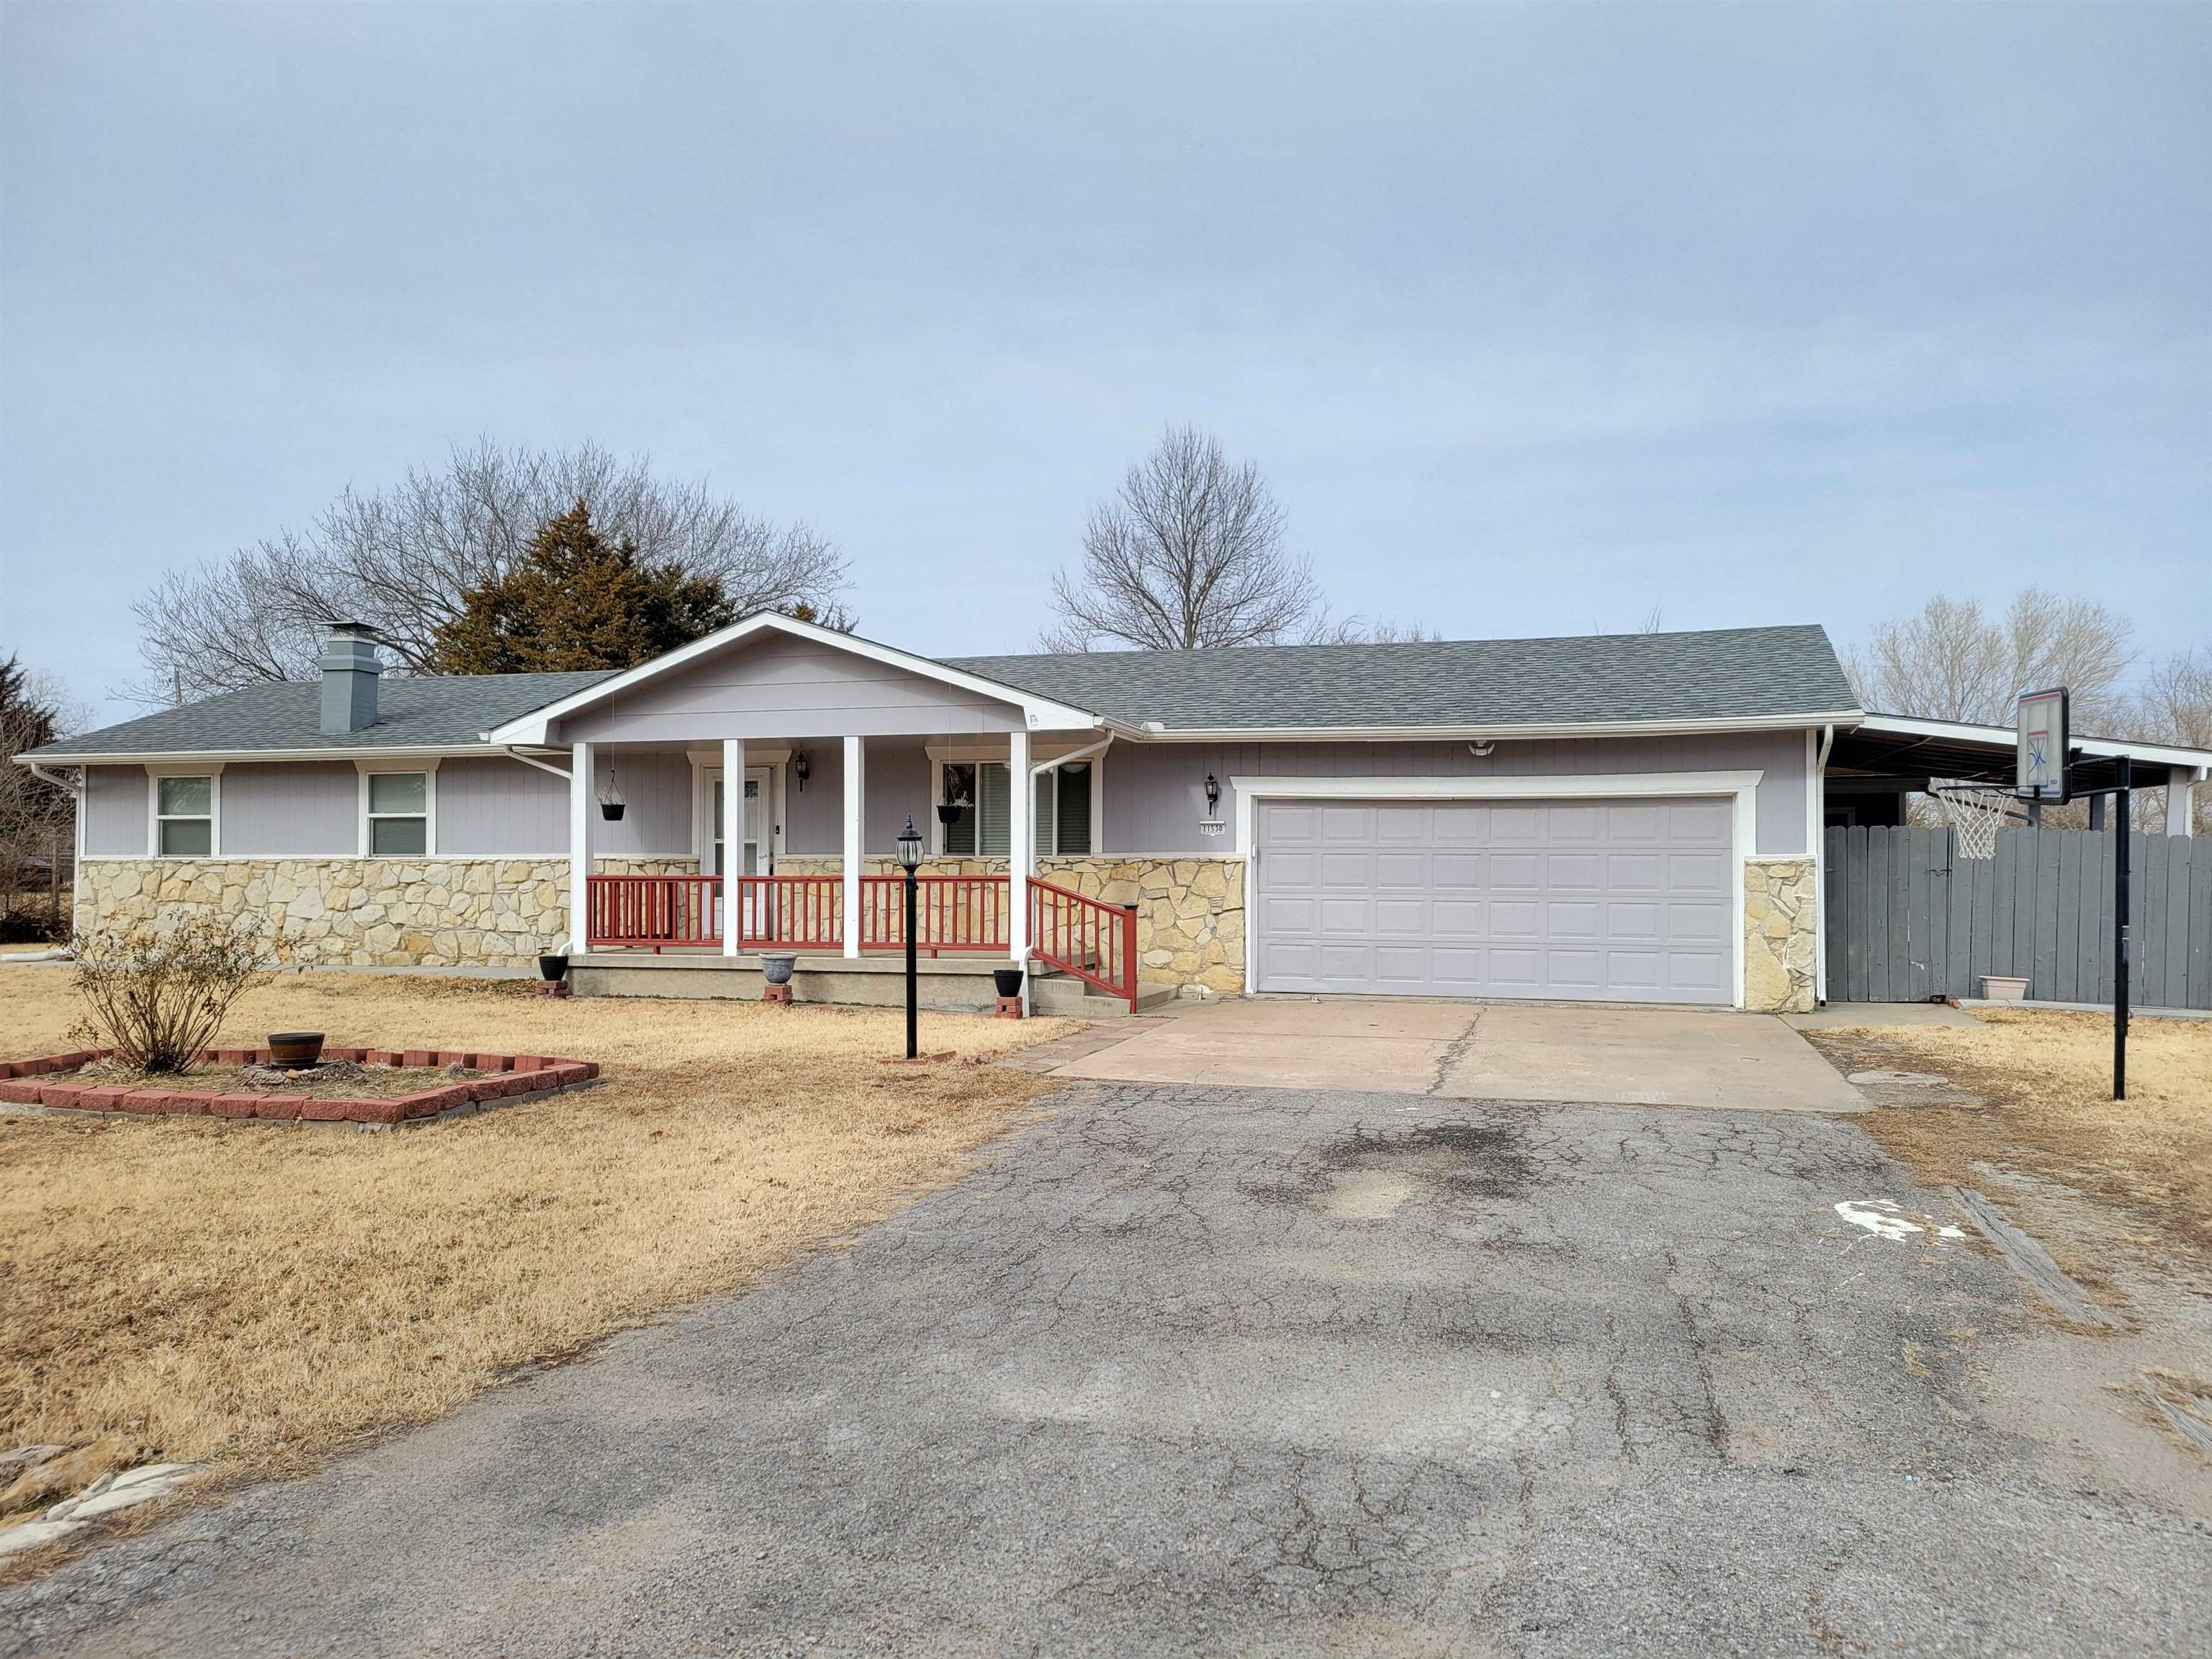 Move-in ready condition on this lovely ranch. Great for first time home buyer. his lovely home has 3 bedrooms and 3 bathrooms, 2 car garage with a carport, huge backyard and fenced in. Come and check it out. This won't last long.